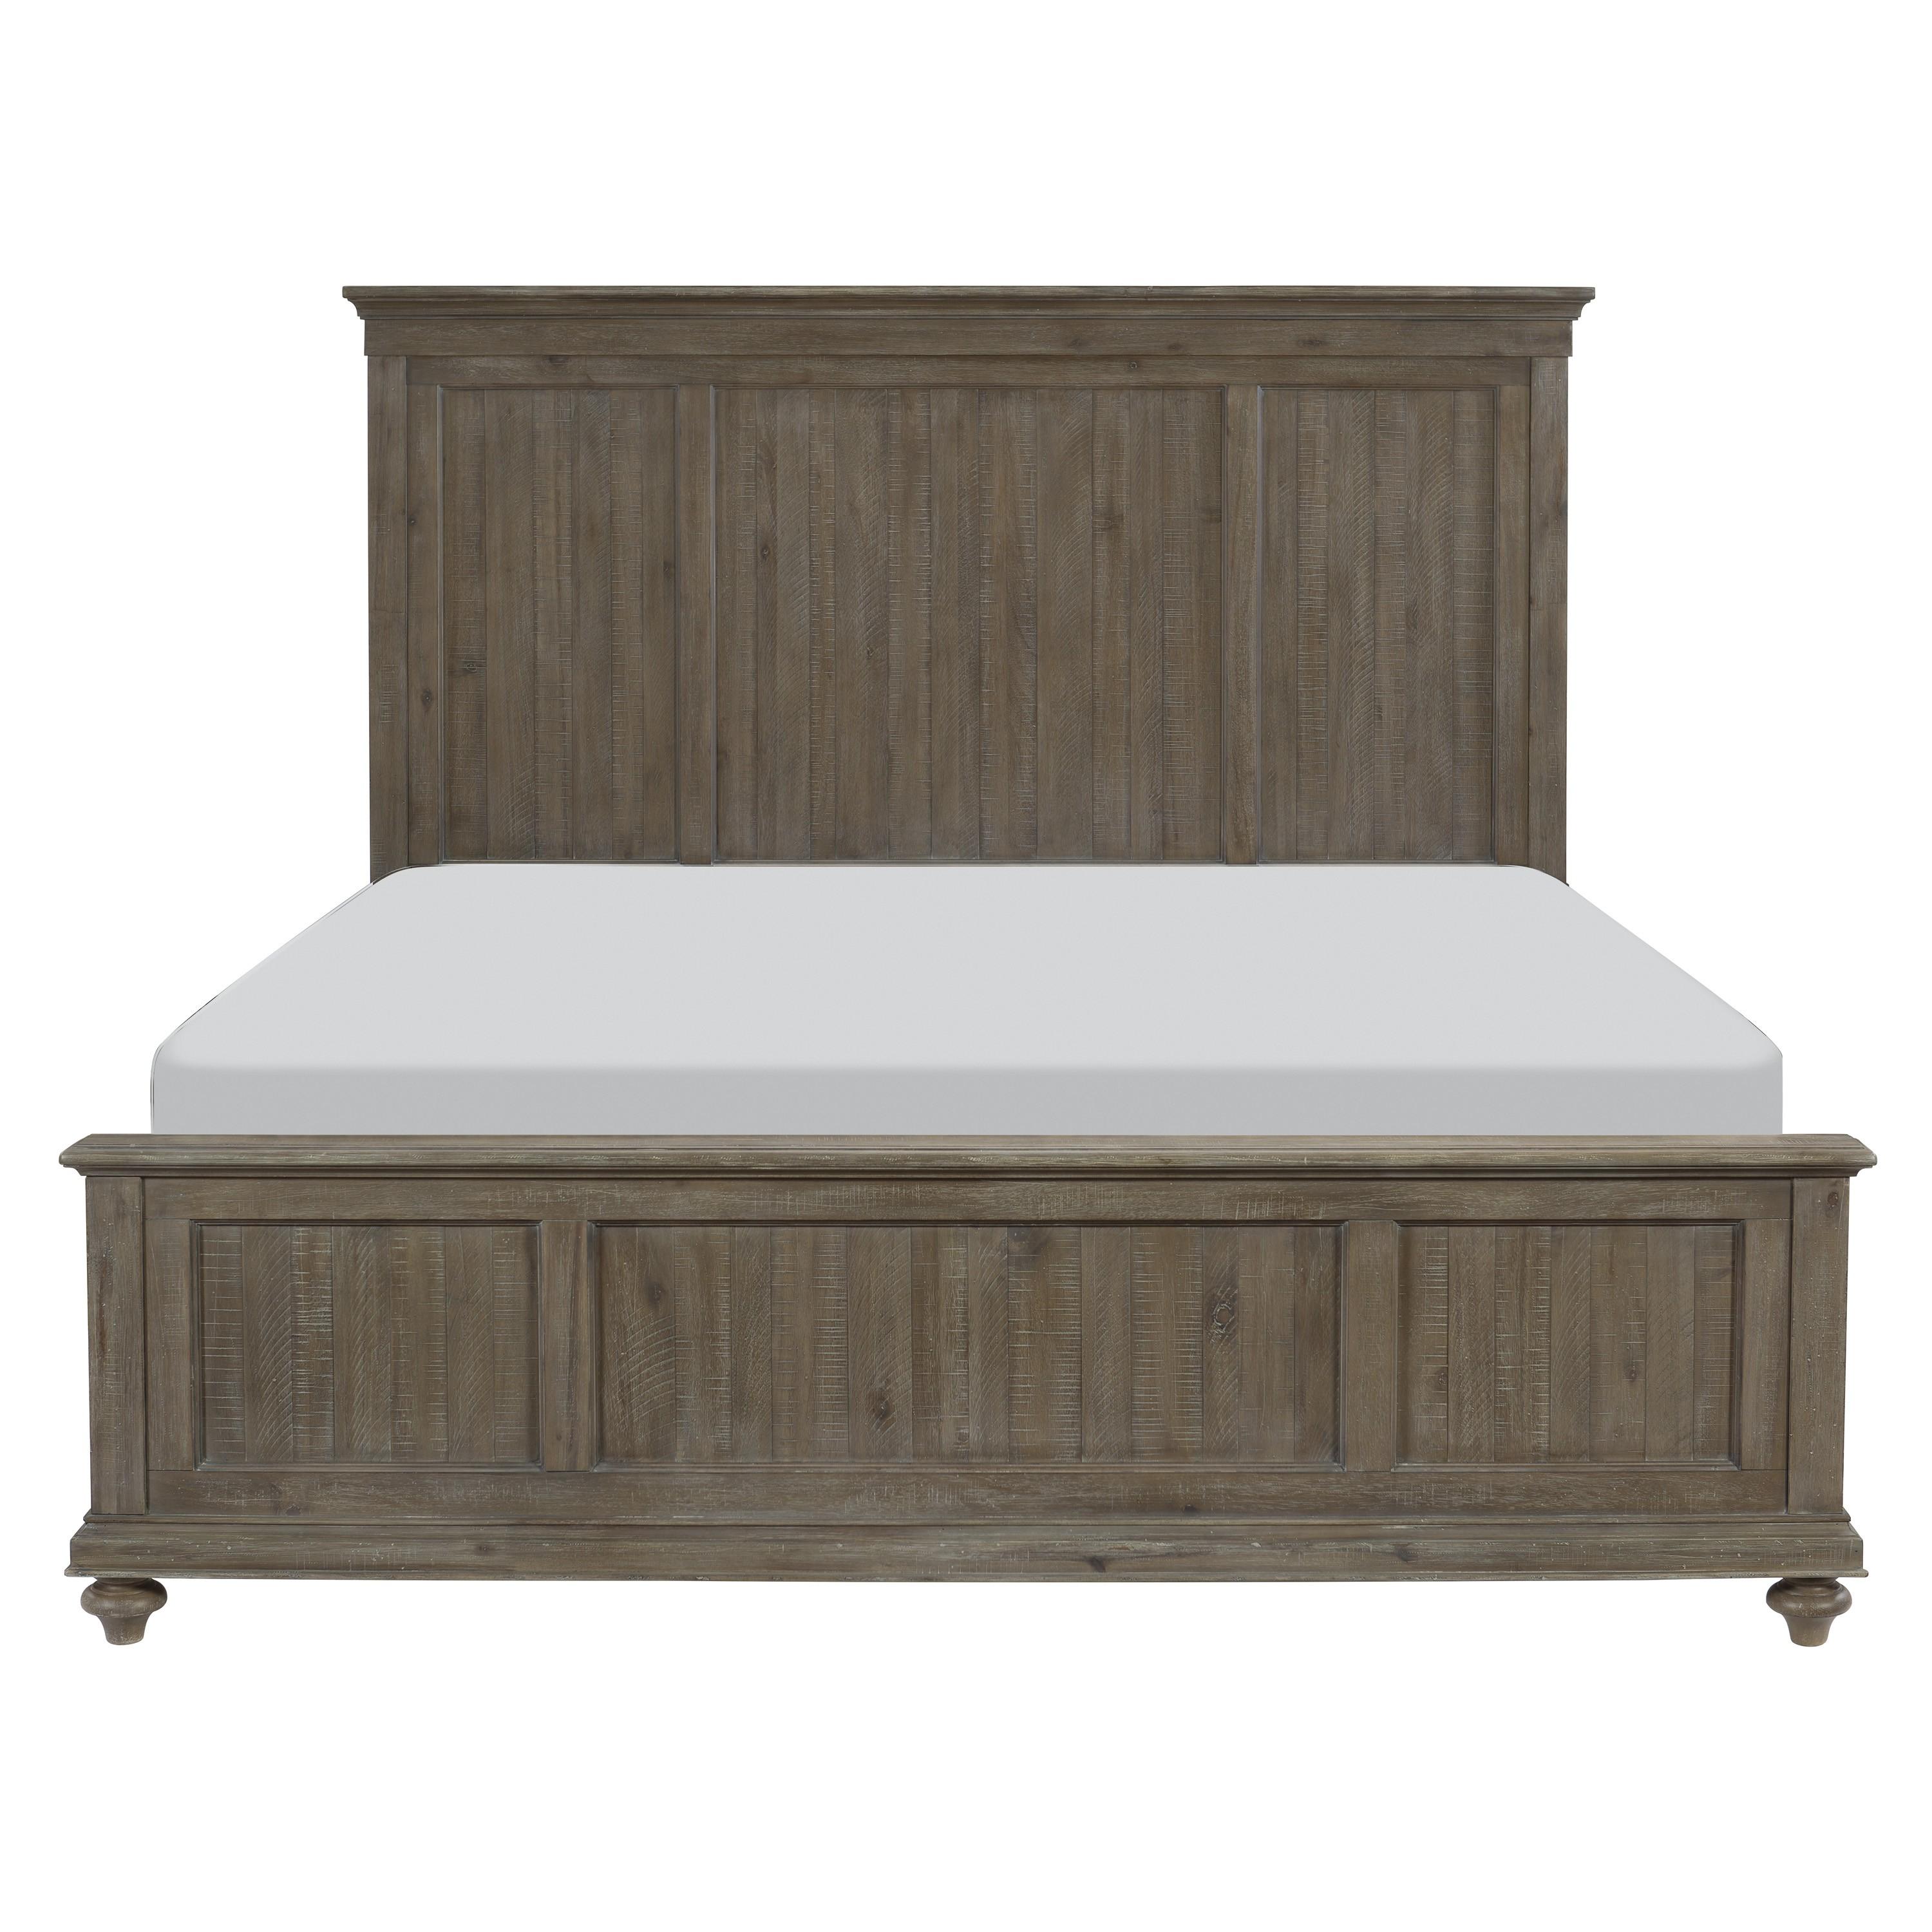 

    
Transitional Driftwood Light Brown Wood Queen Bed Homelegance 1689BR-1* Cardano
